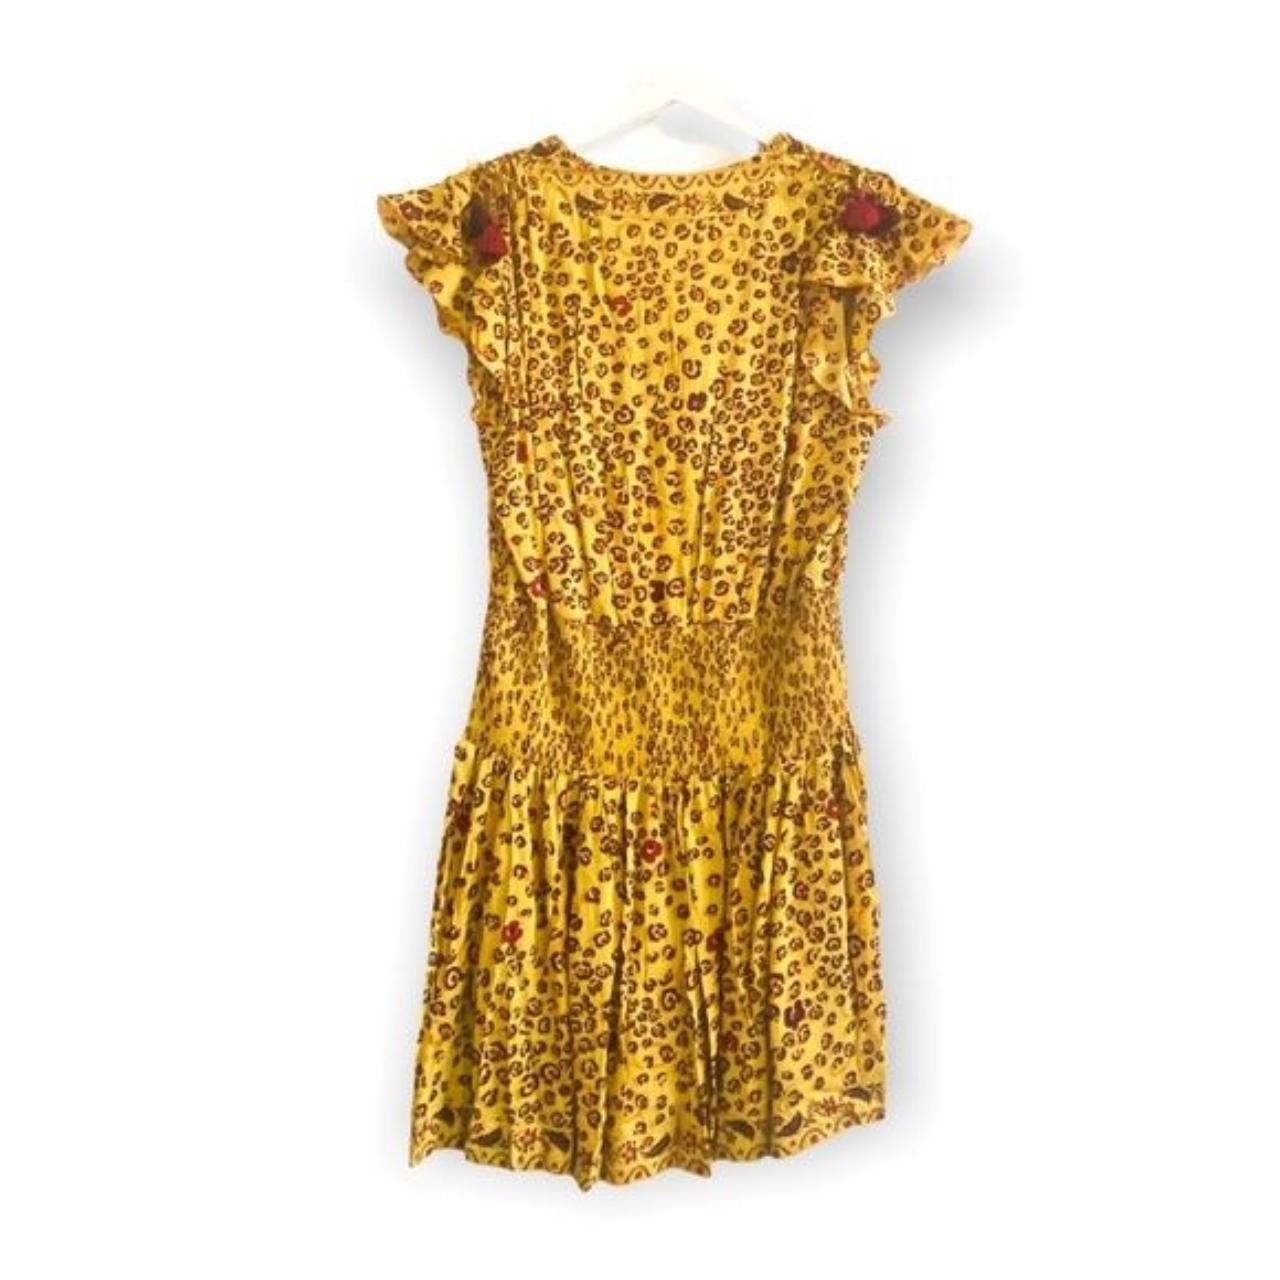 Poupette St Barth Women's Yellow and Red Dress (2)